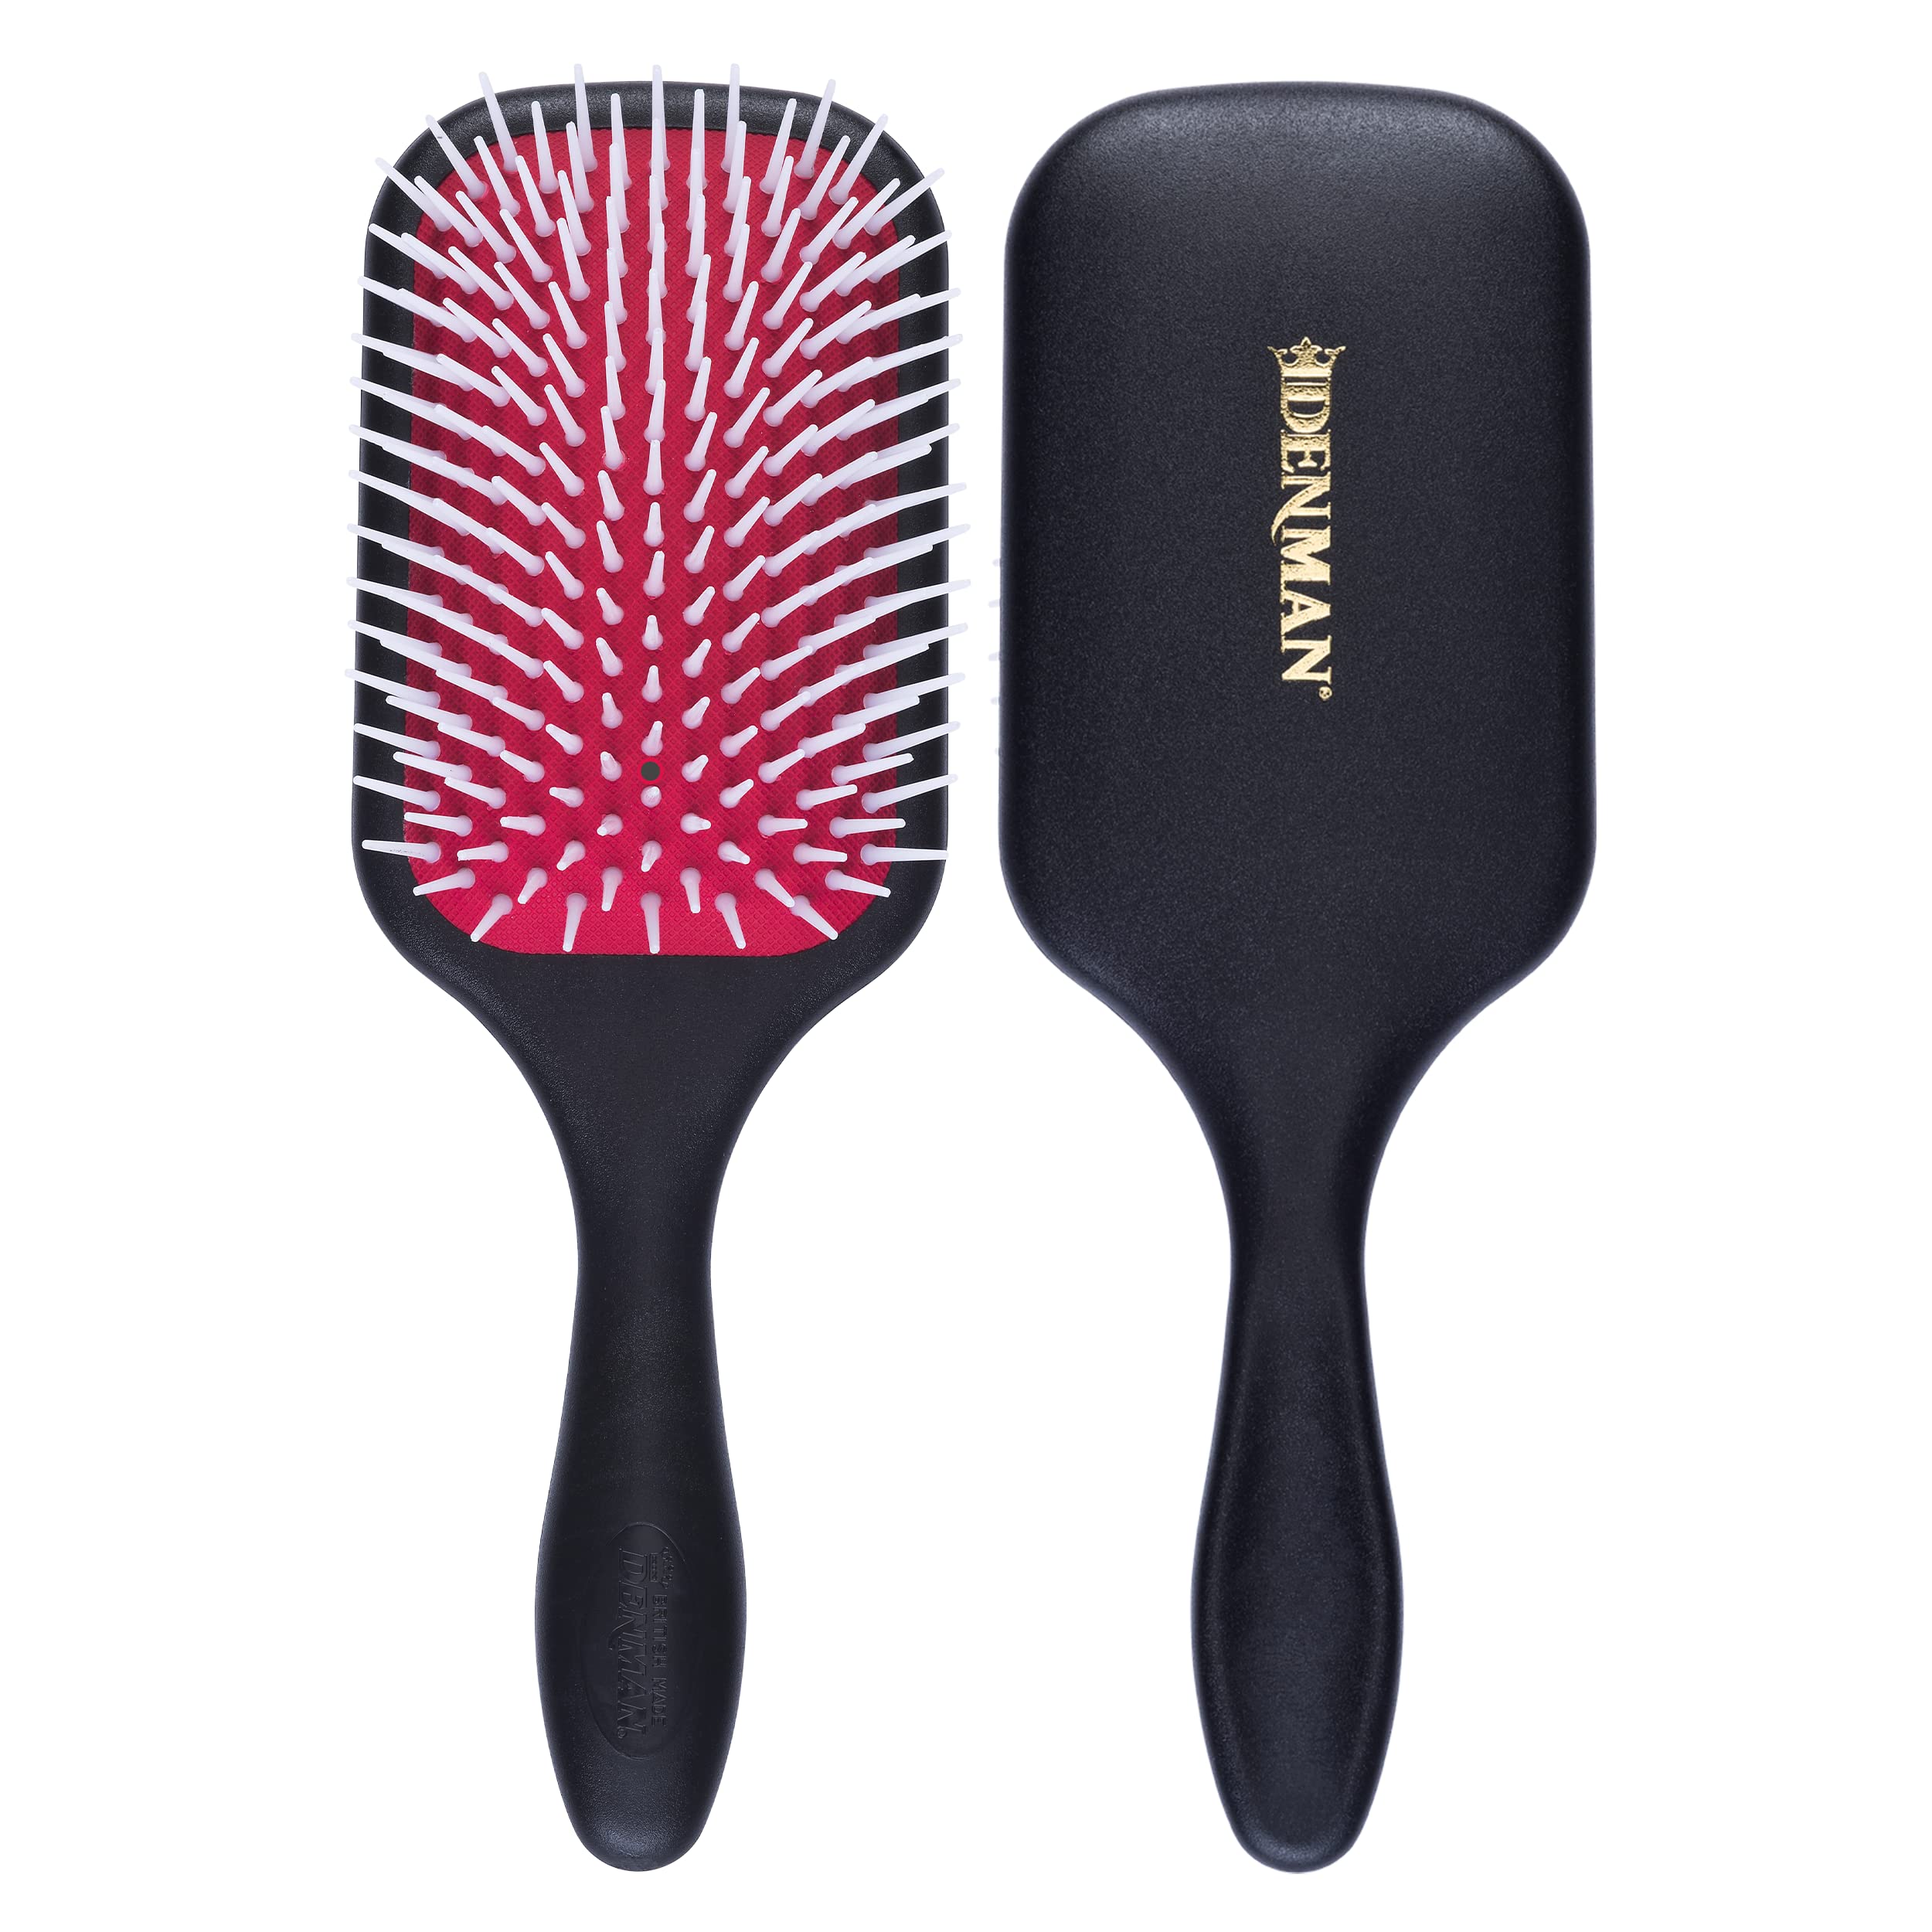 Denman Power Paddle Hair Brush for Fast and Comfortable Detangling, Blow Drying and Styling - Combination of D3 Styling Pins & Paddle Brush - For Women and Men (Red & Black), P038